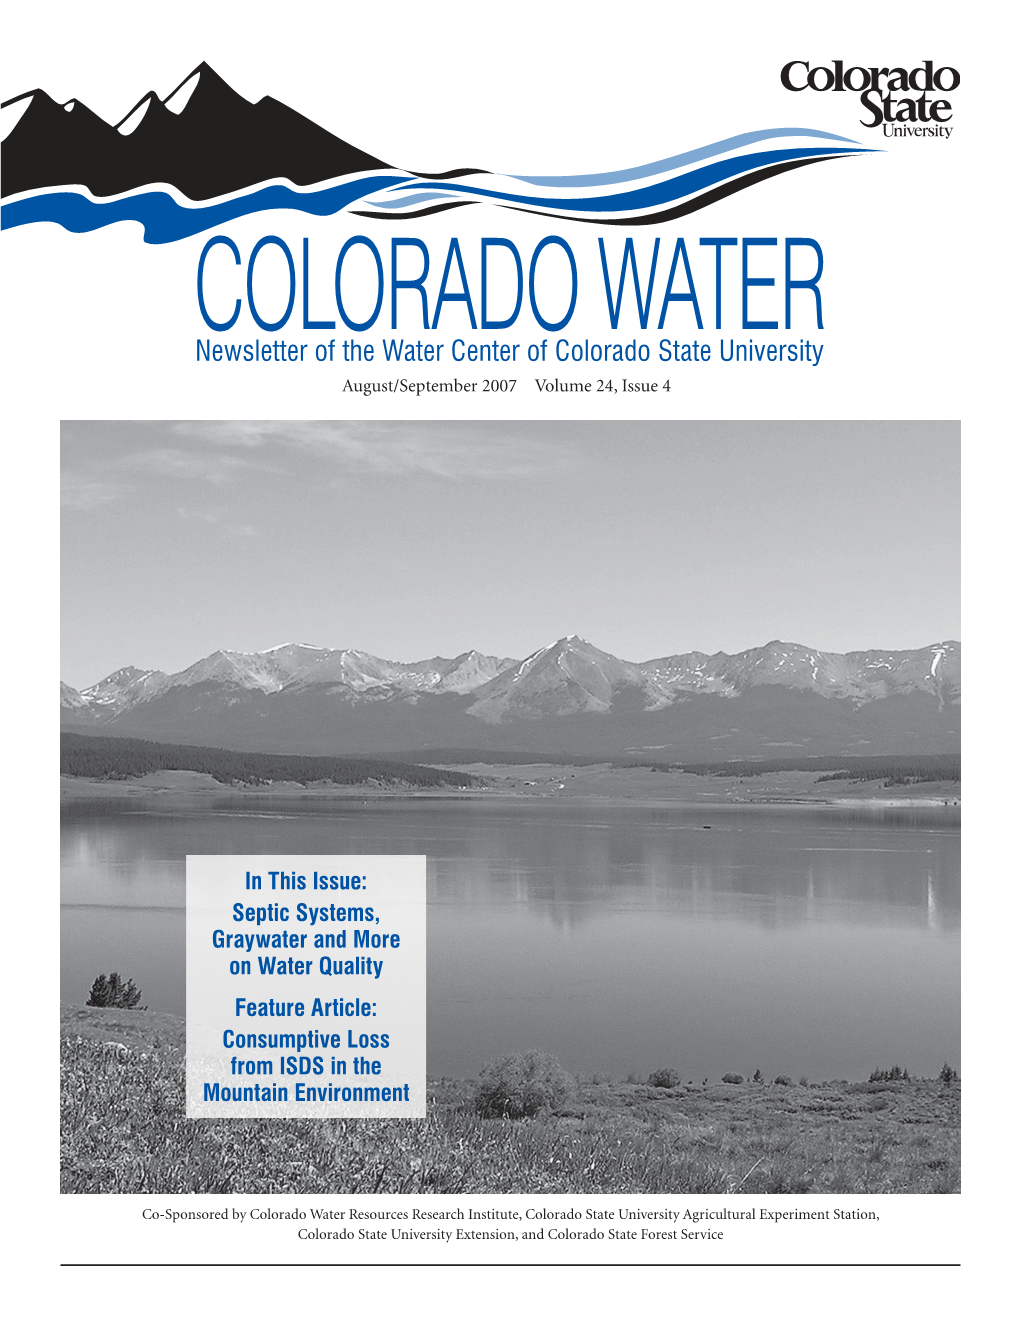 In This Issue: Septic Systems, Graywater and More on Water Quality Feature Article: Consumptive Loss from ISDS in the Mountain Environment